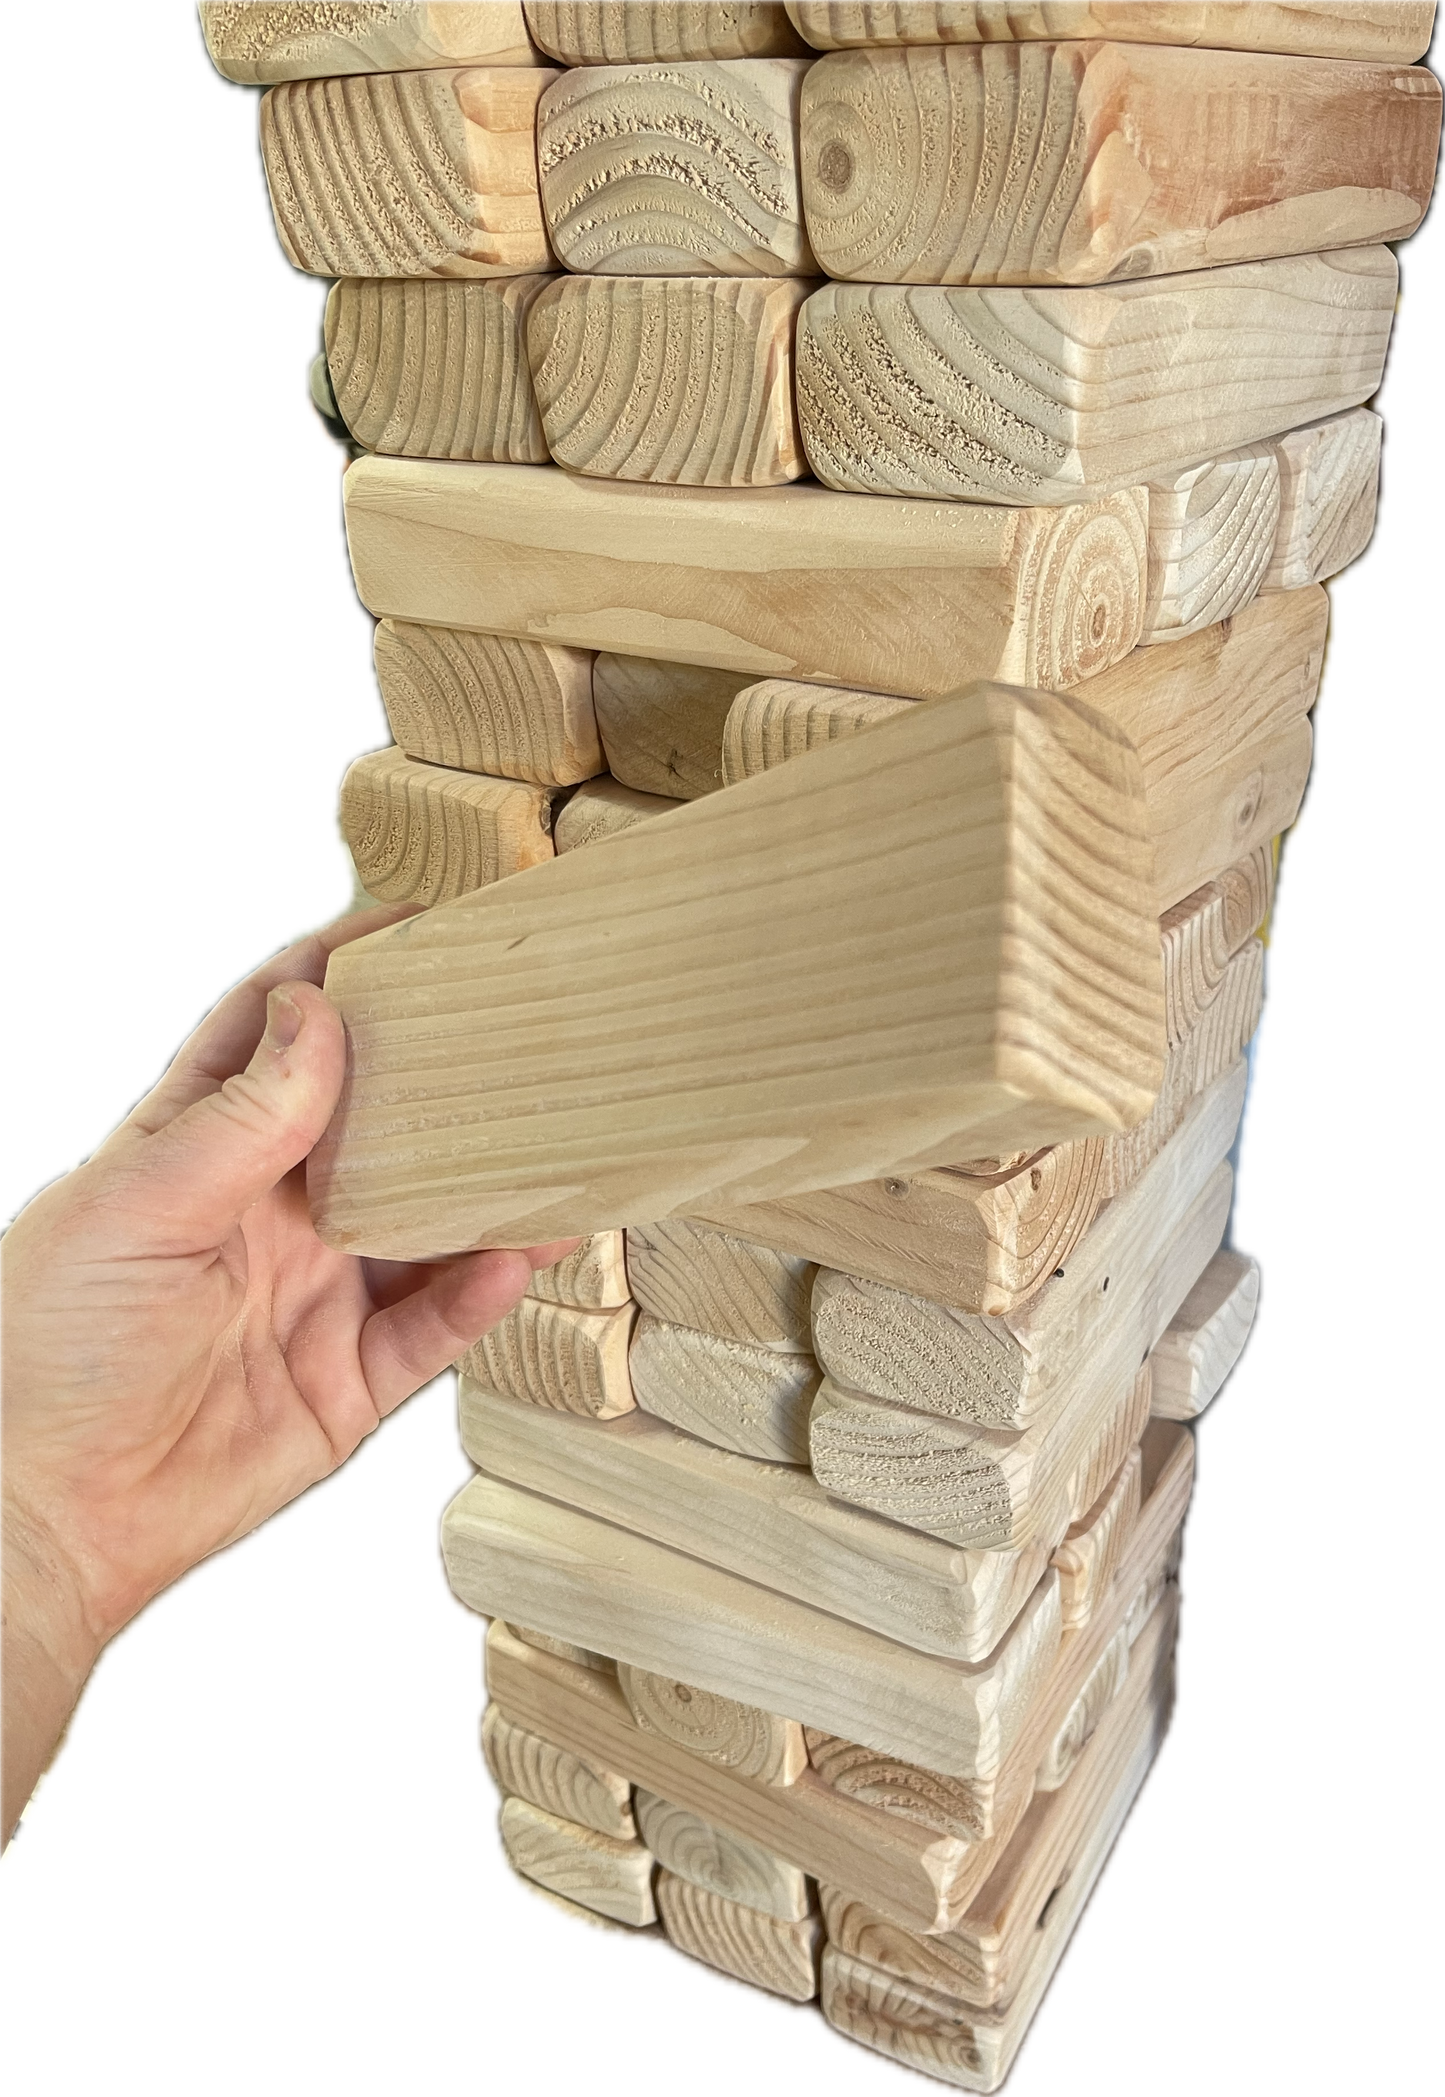 GIANT TUMBLE TOWER GAME 45 NATURAL WOOD + STORAGE CASE